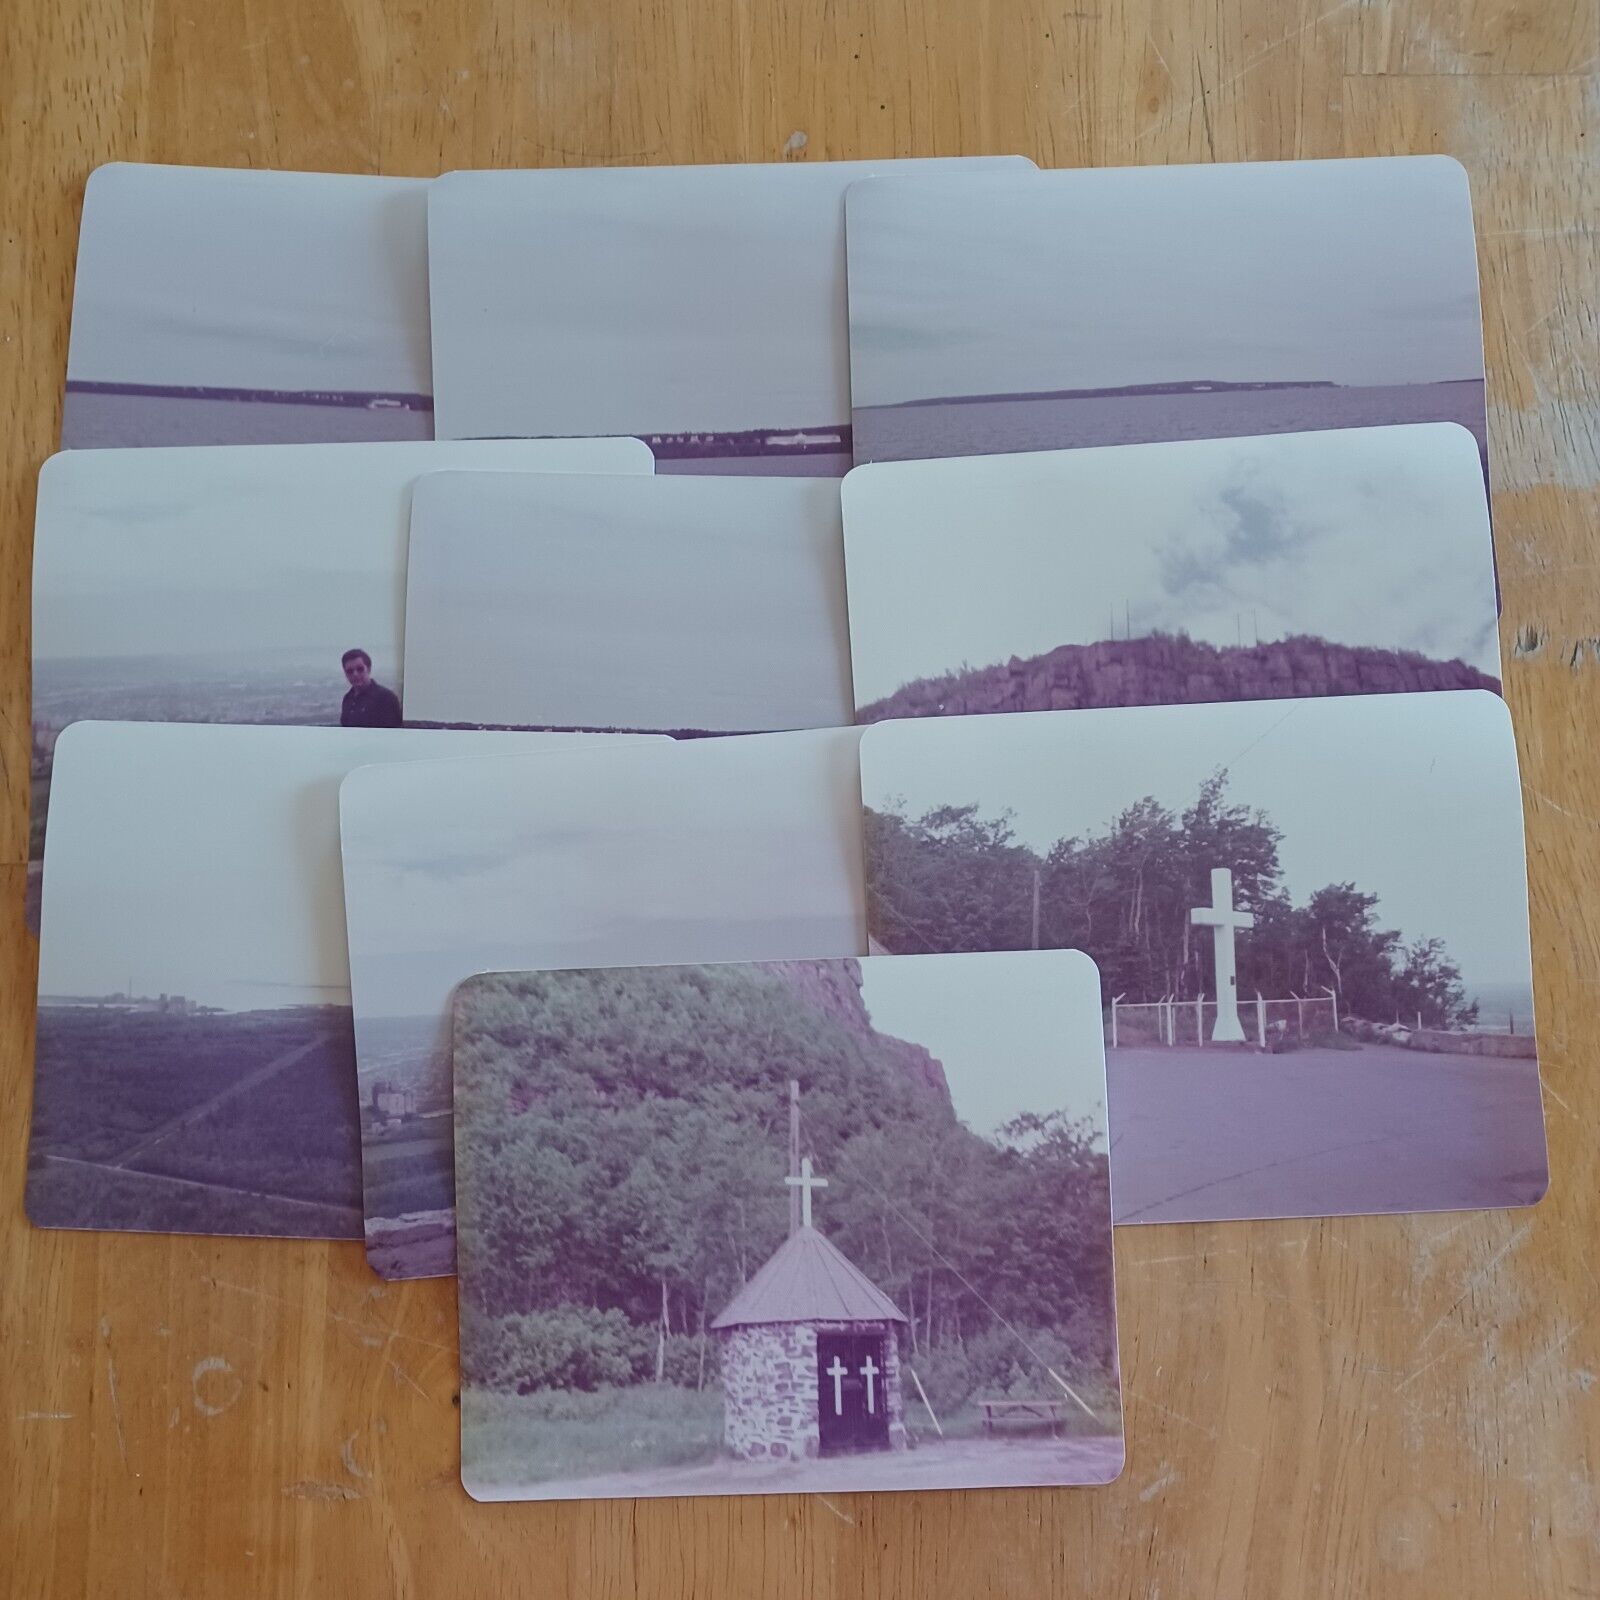 Lot of 10 Post-A-Photo Postcards - People Scenery Water Boat Landscape 